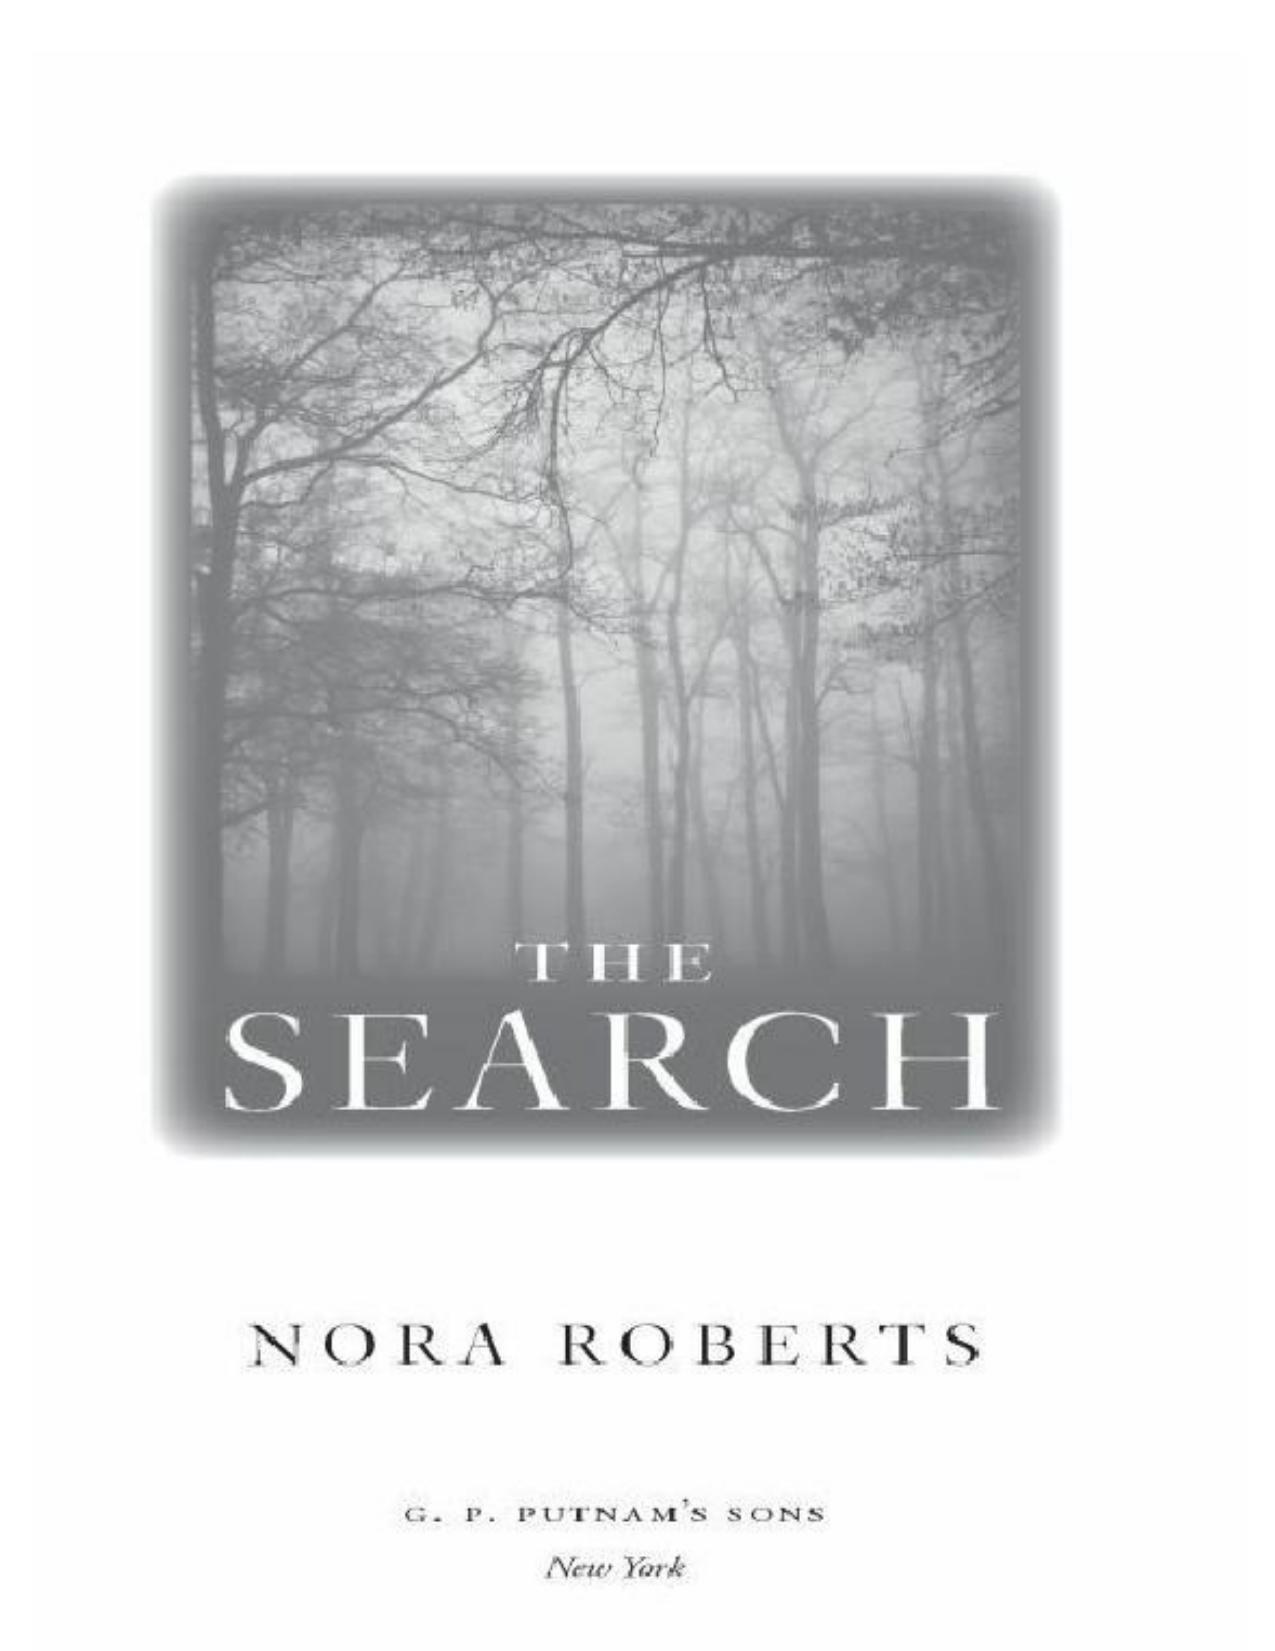 The Search by Nora Roberts